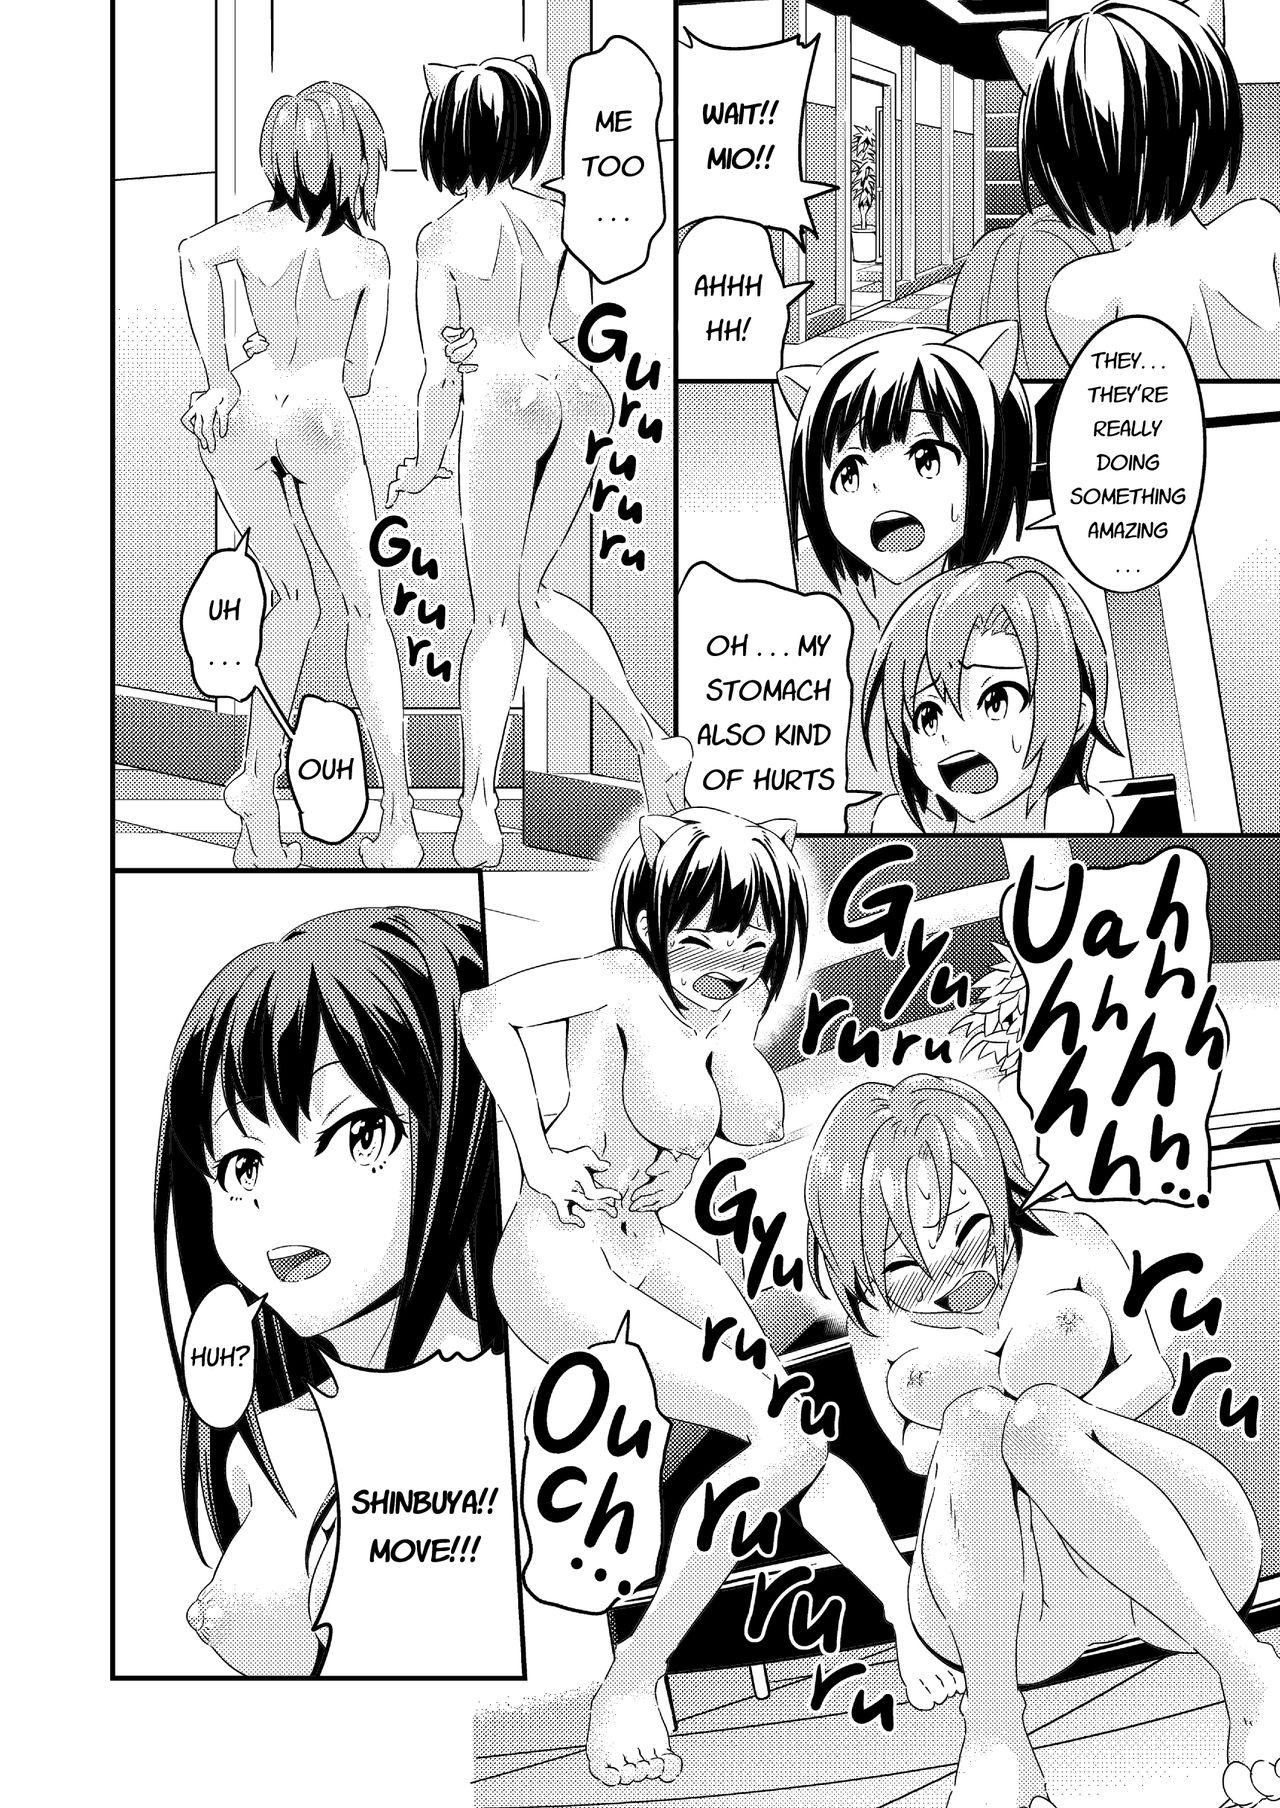 Que ICE WORK - The idolmaster Bedroom - Page 9